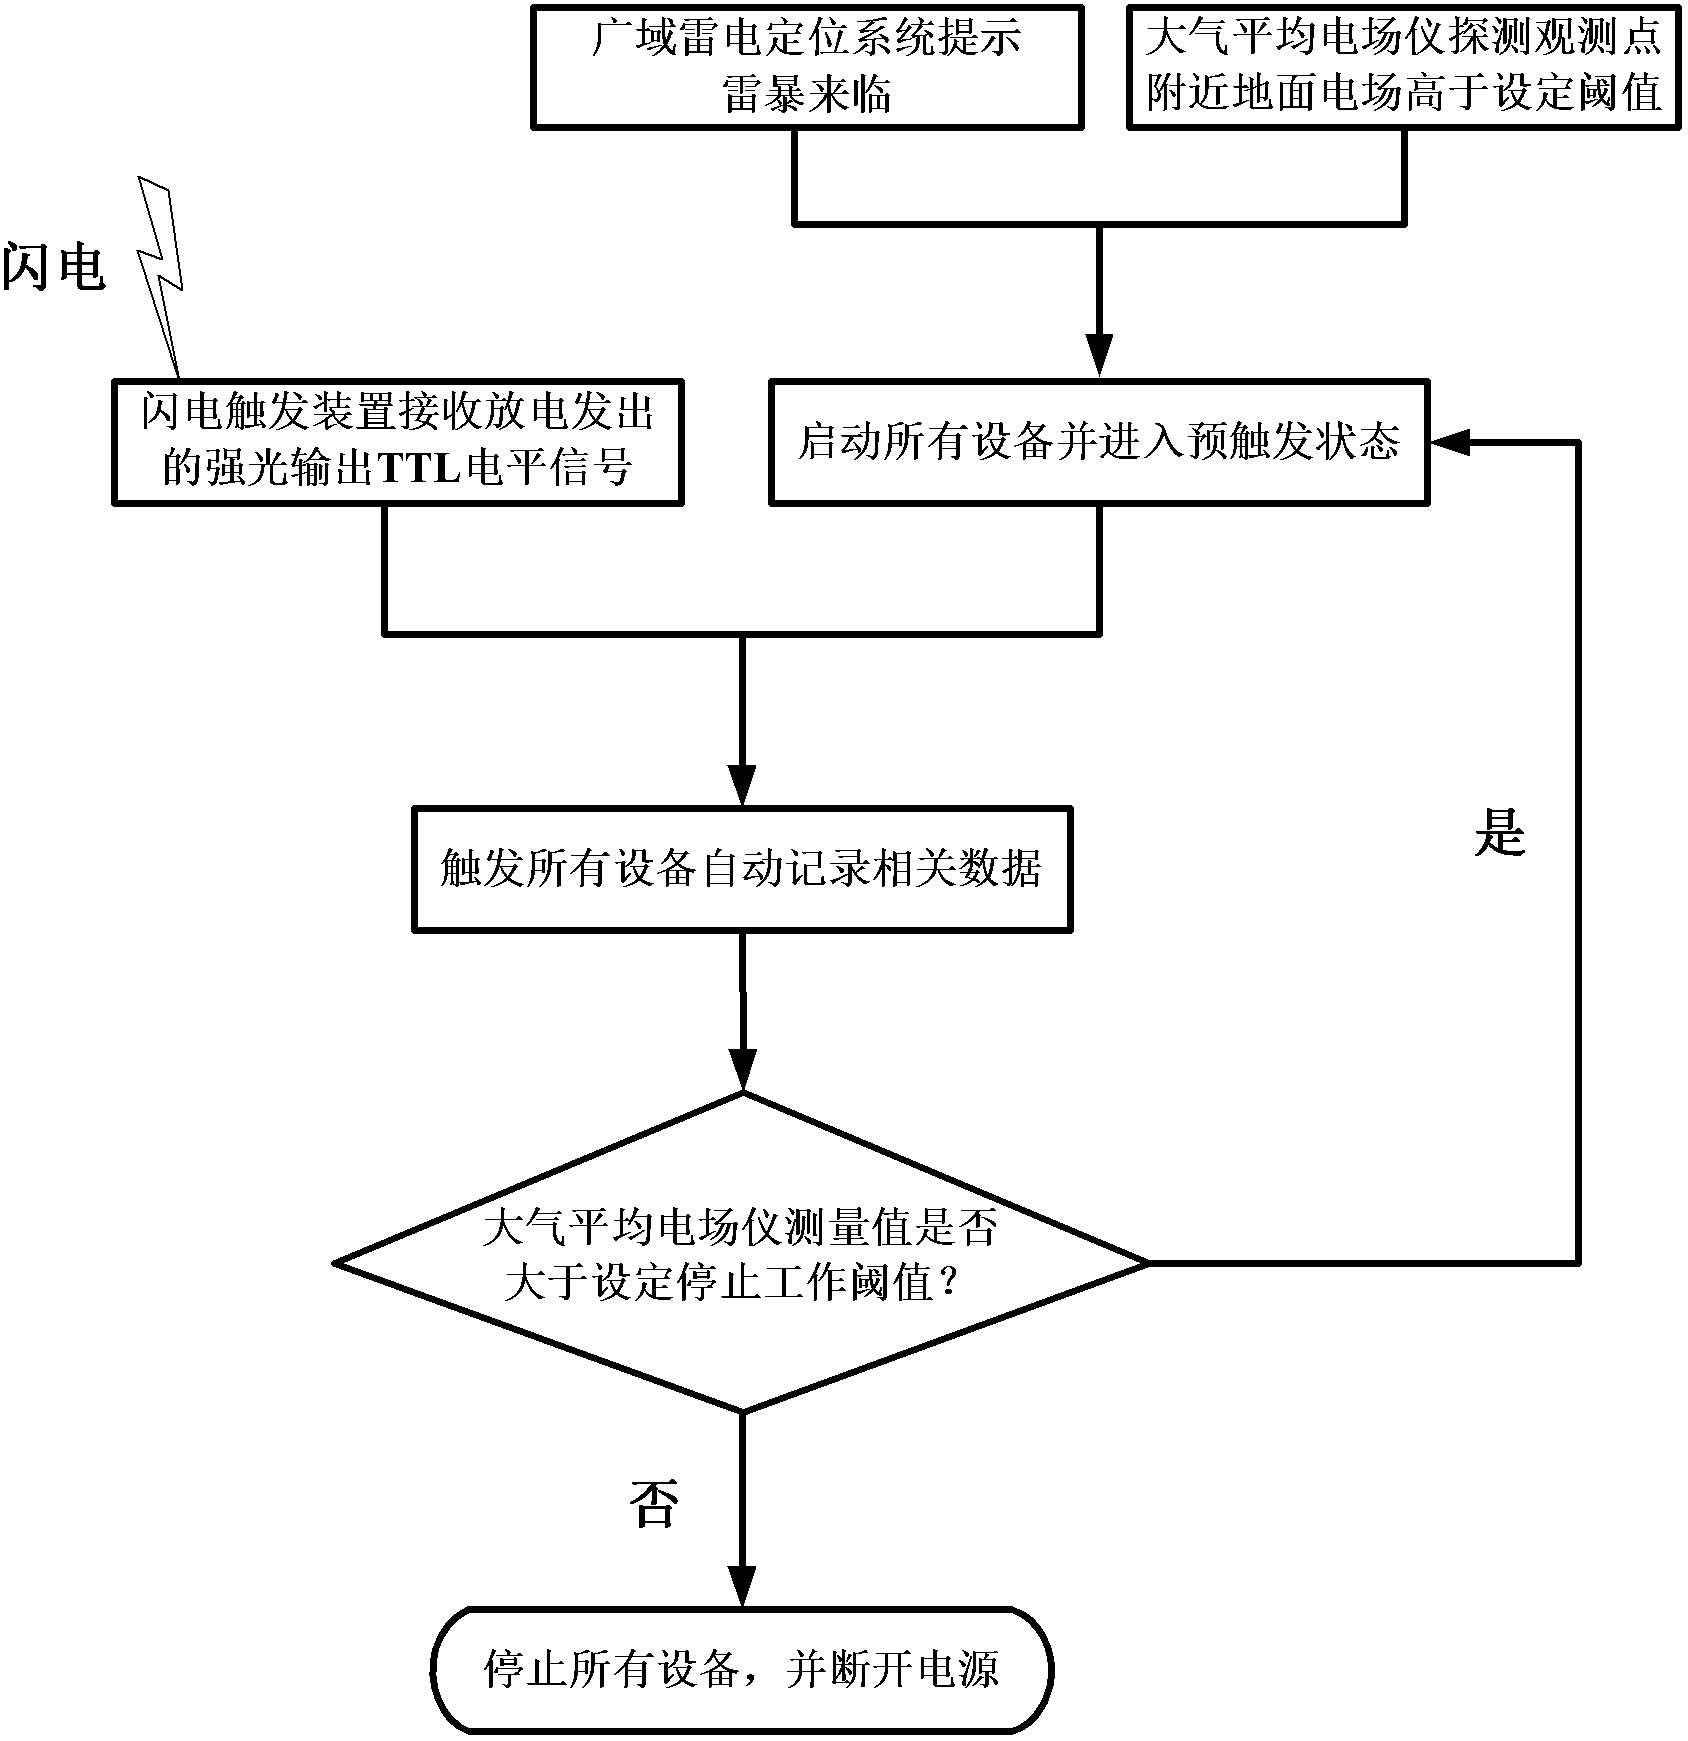 Method and system for comprehensively and synchronously observing lightning stroke discharge